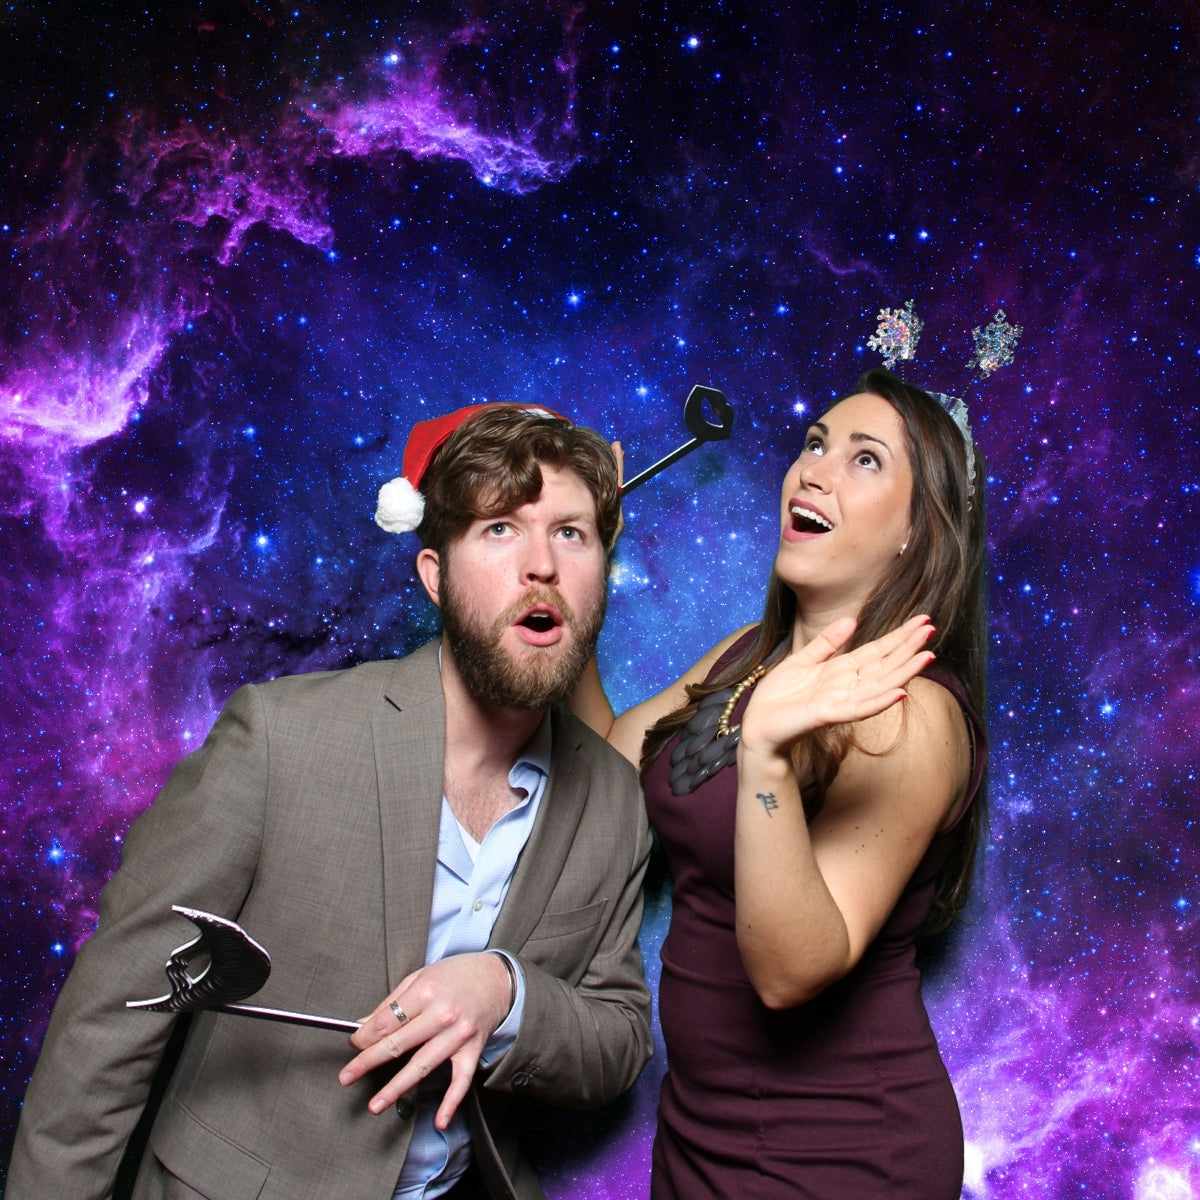 Green Screen Photo Booth Picture of Man and Woman Staring Off into Outer Space